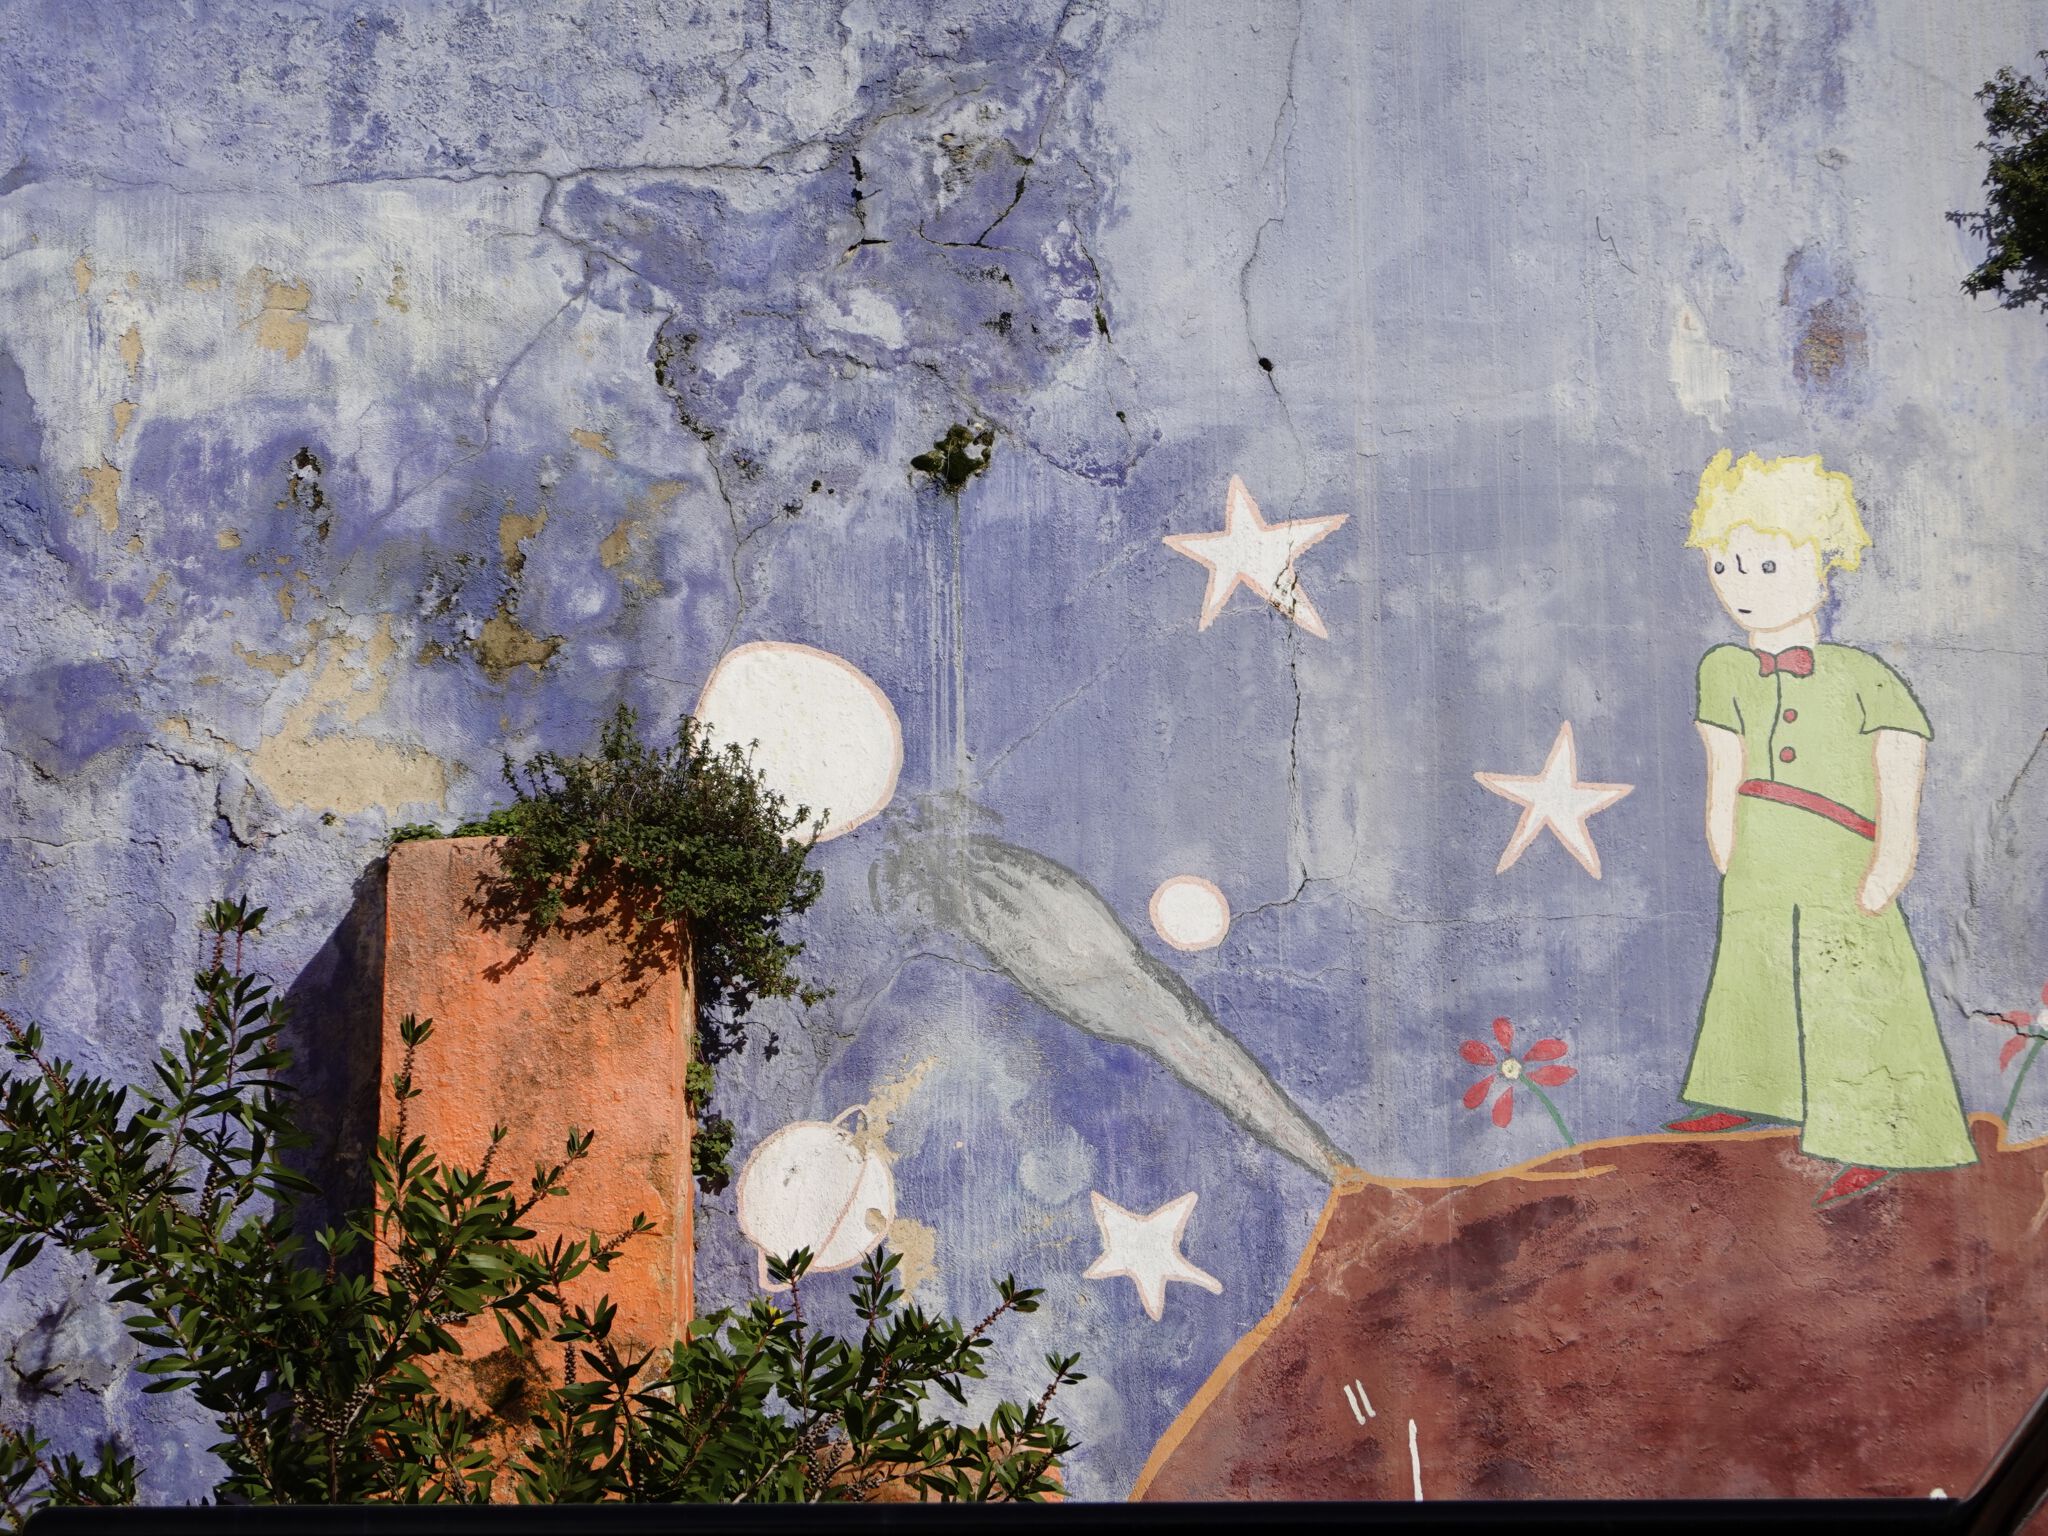 Unknown - Santander&mdash;Tribute to the Little Prince  